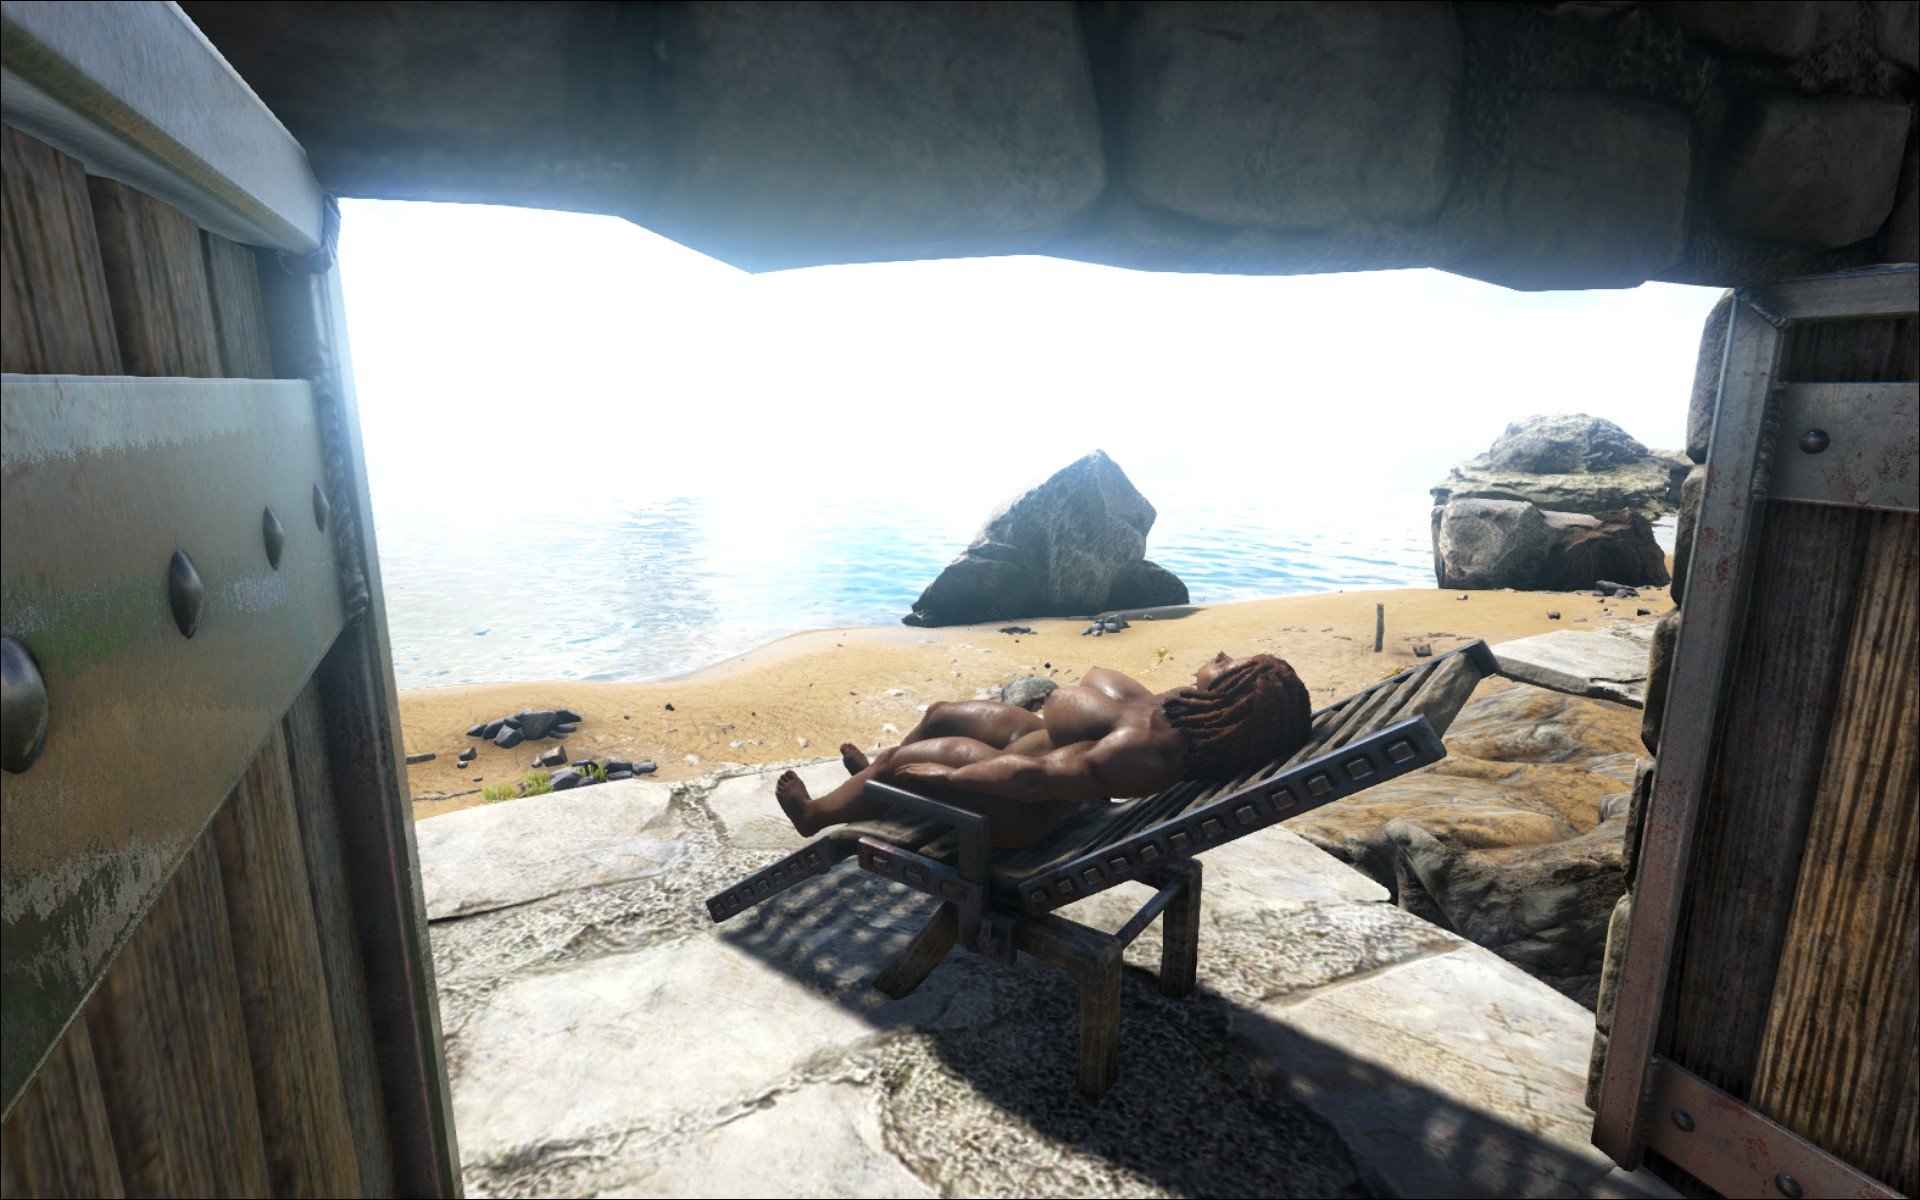 Sexy 110 naked picture Ark Survival Evolved Amazonia Ii Mod Adult Gaming, a...